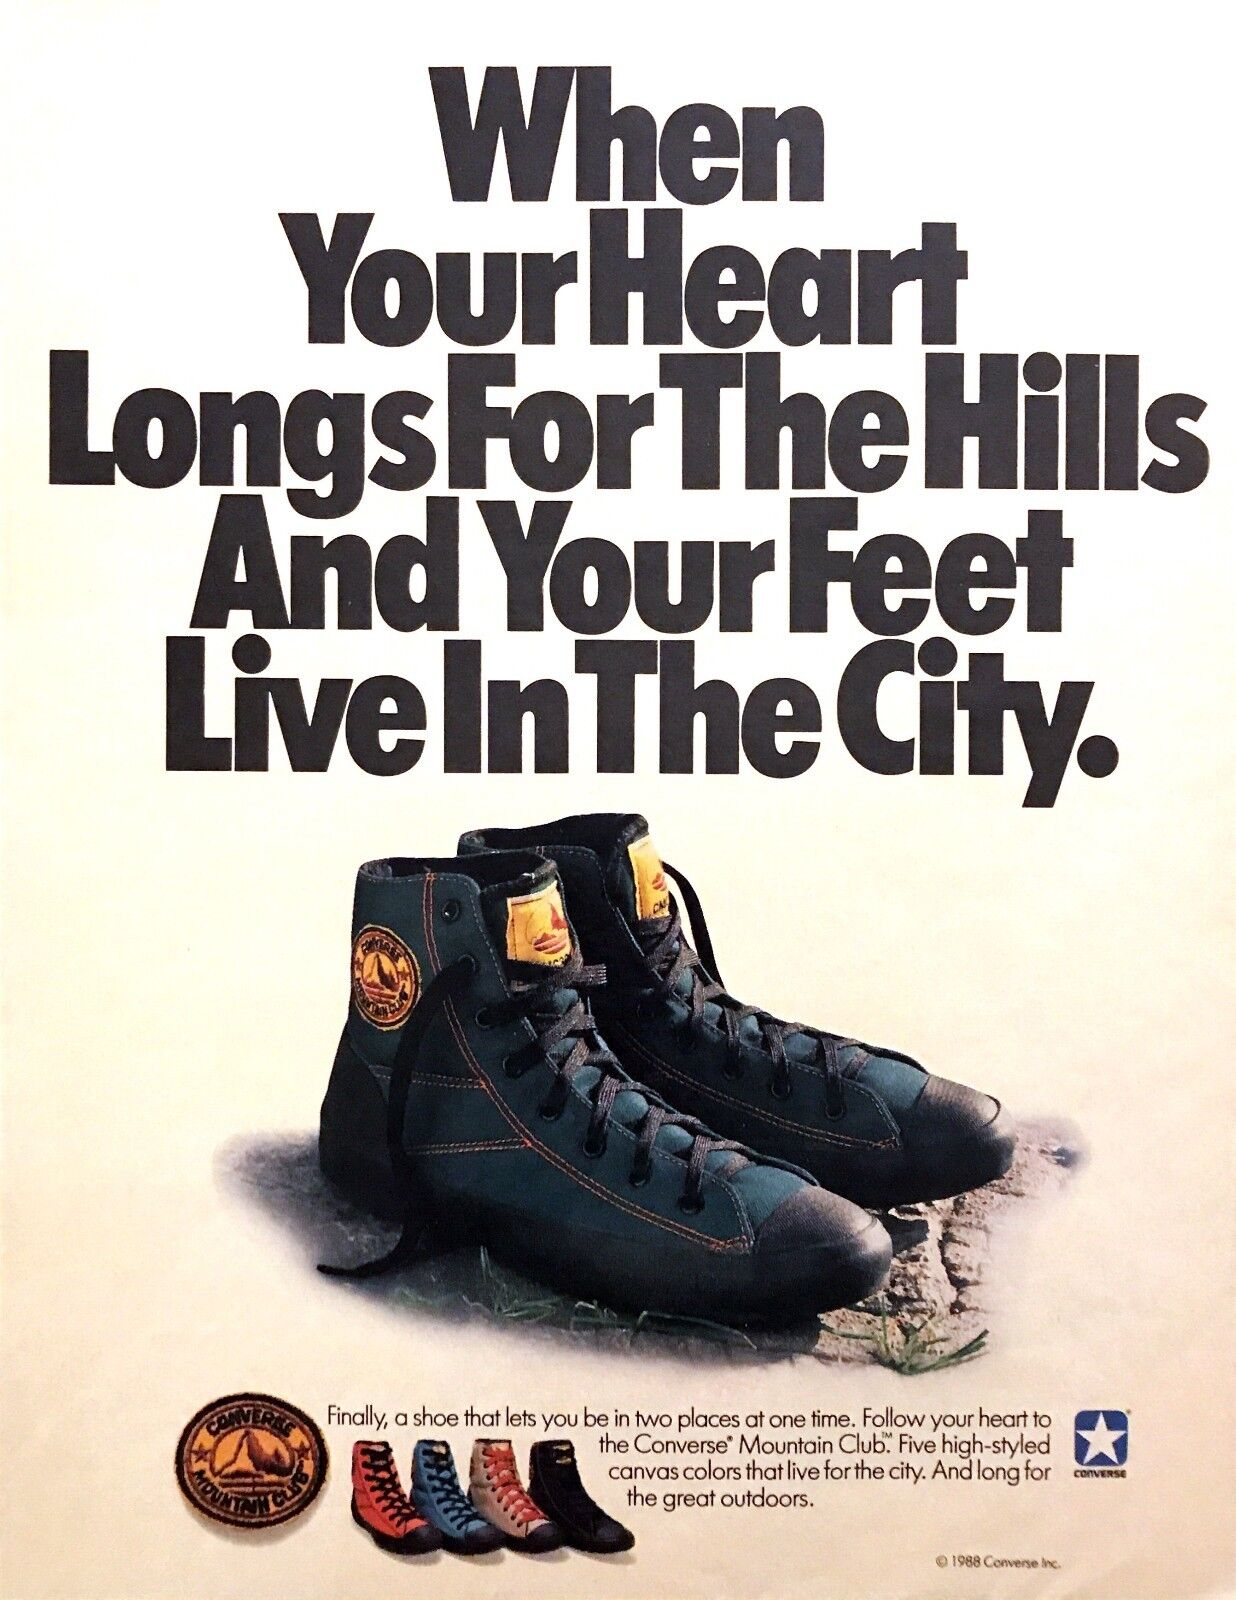 1988 Converse Mountain Club Canvas Shoes photo "For The City & Hills" print ad Converse